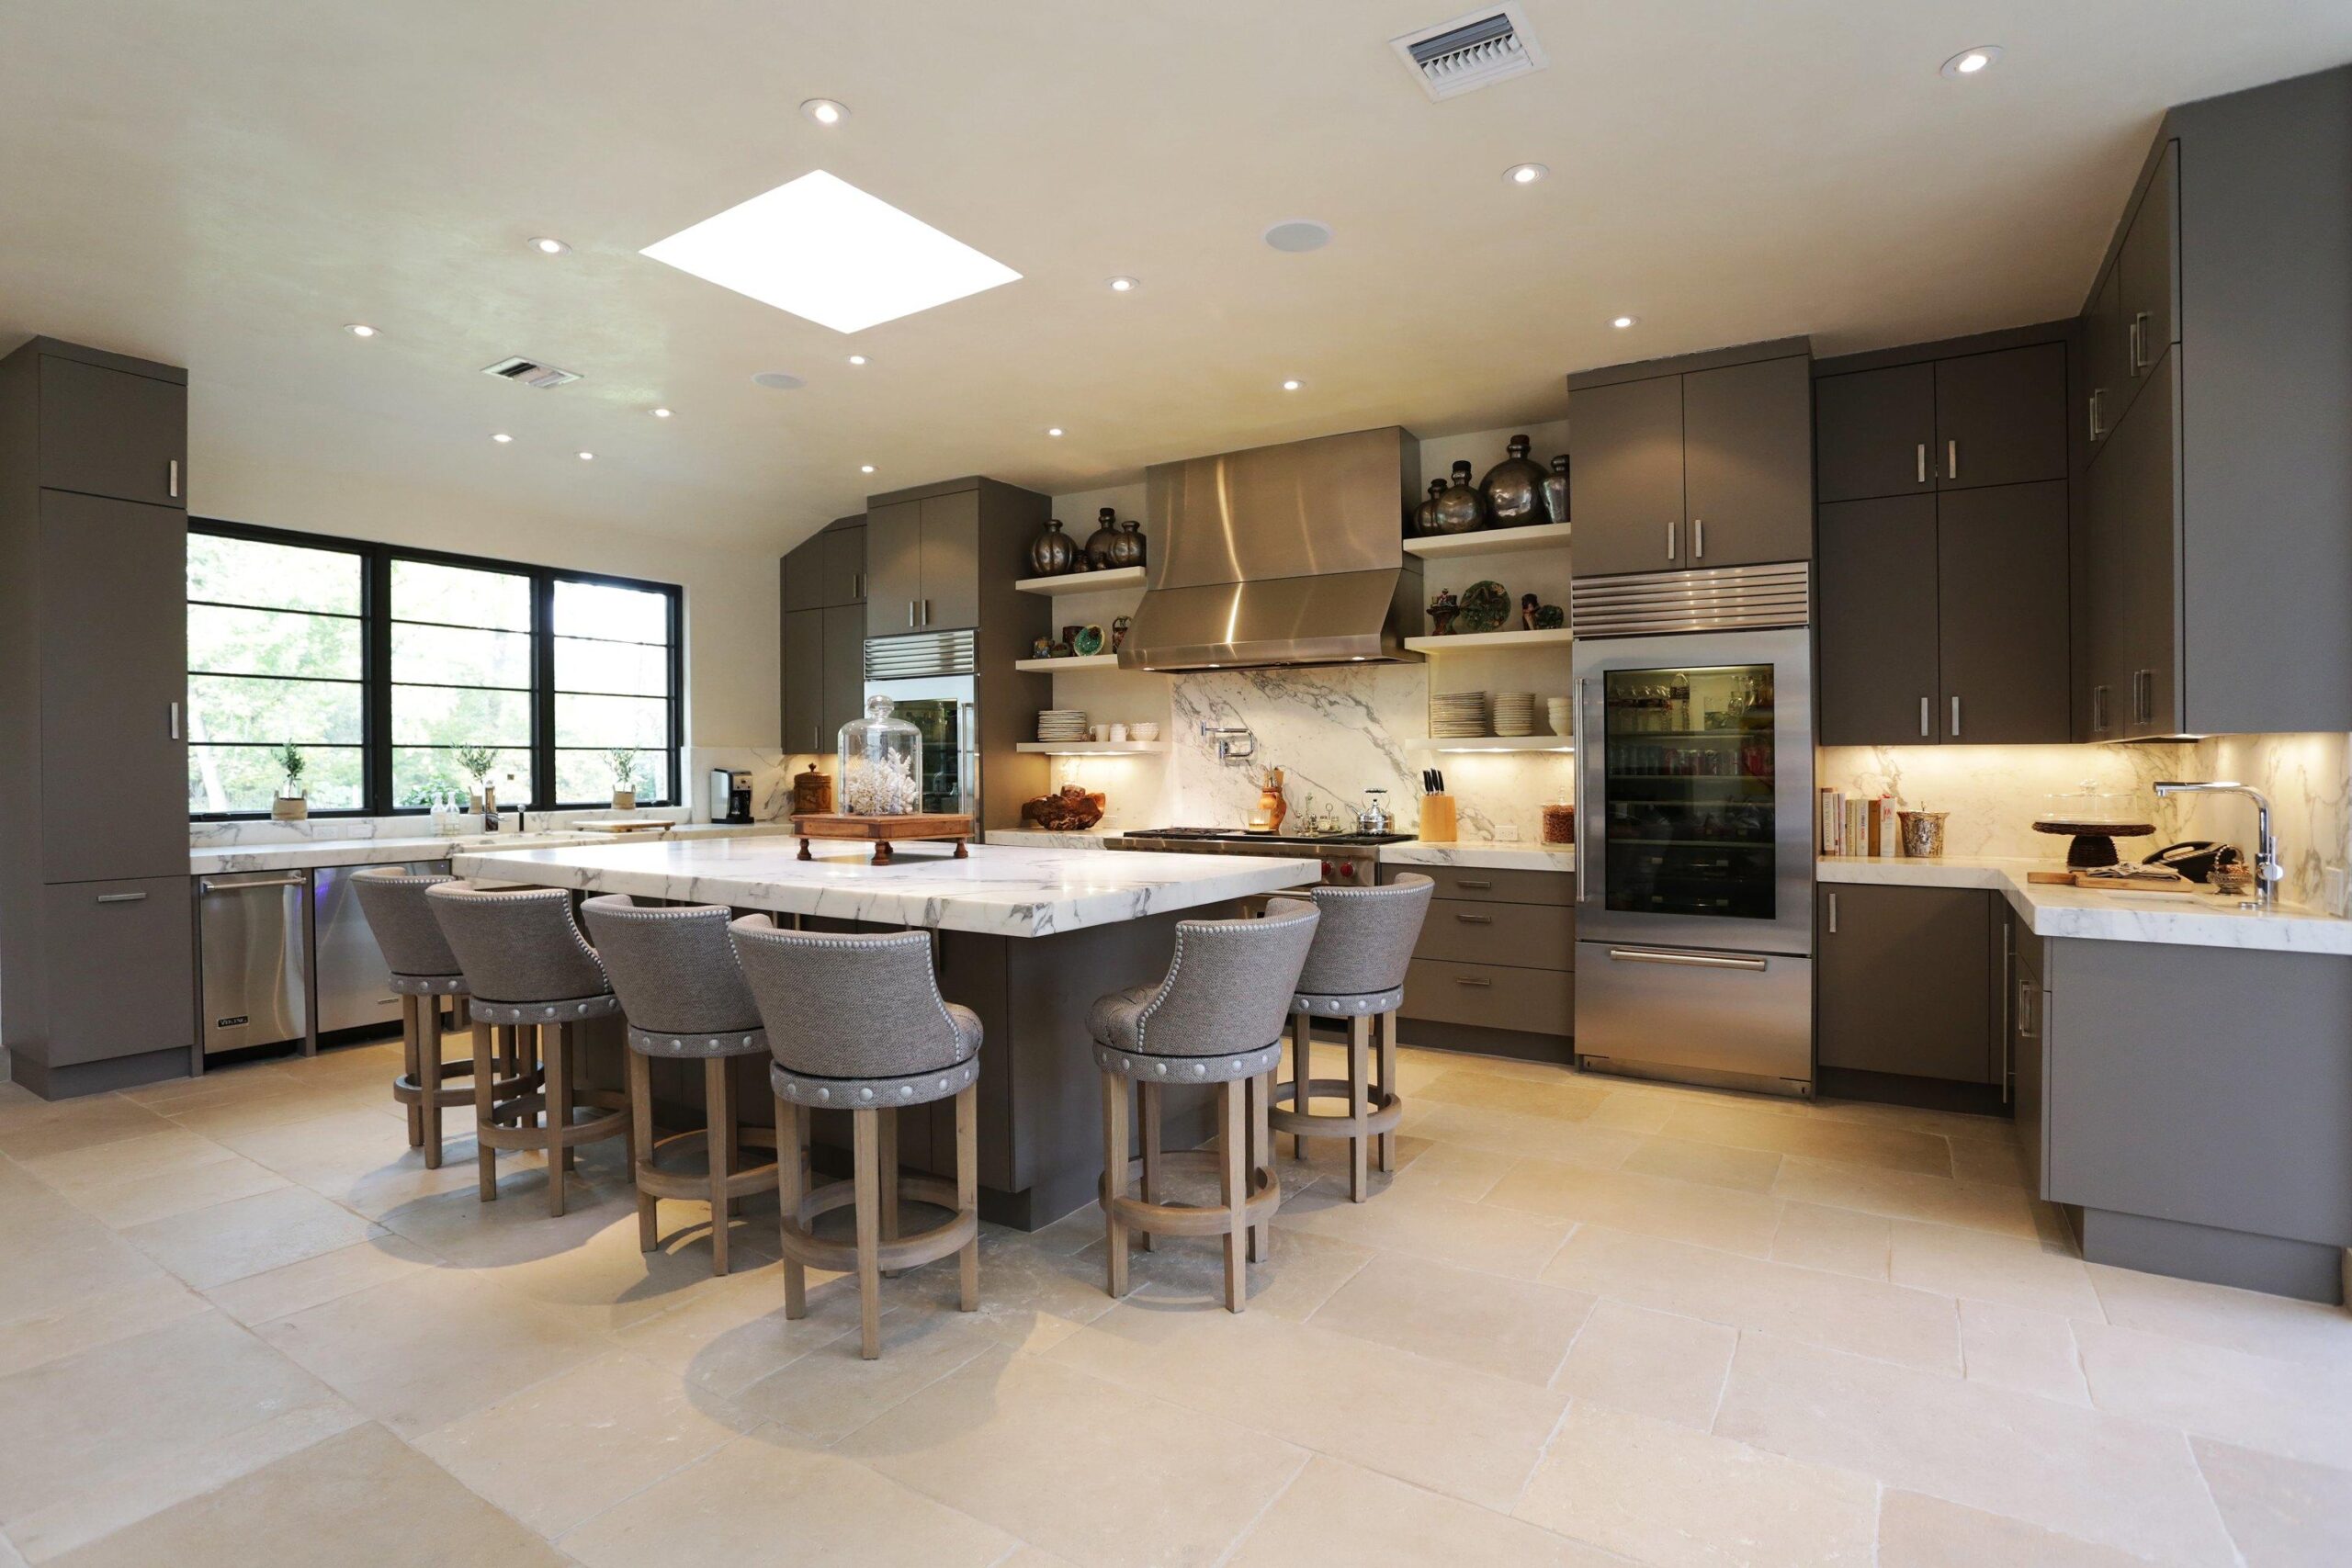 Furnished layout of grey colored kitchen.